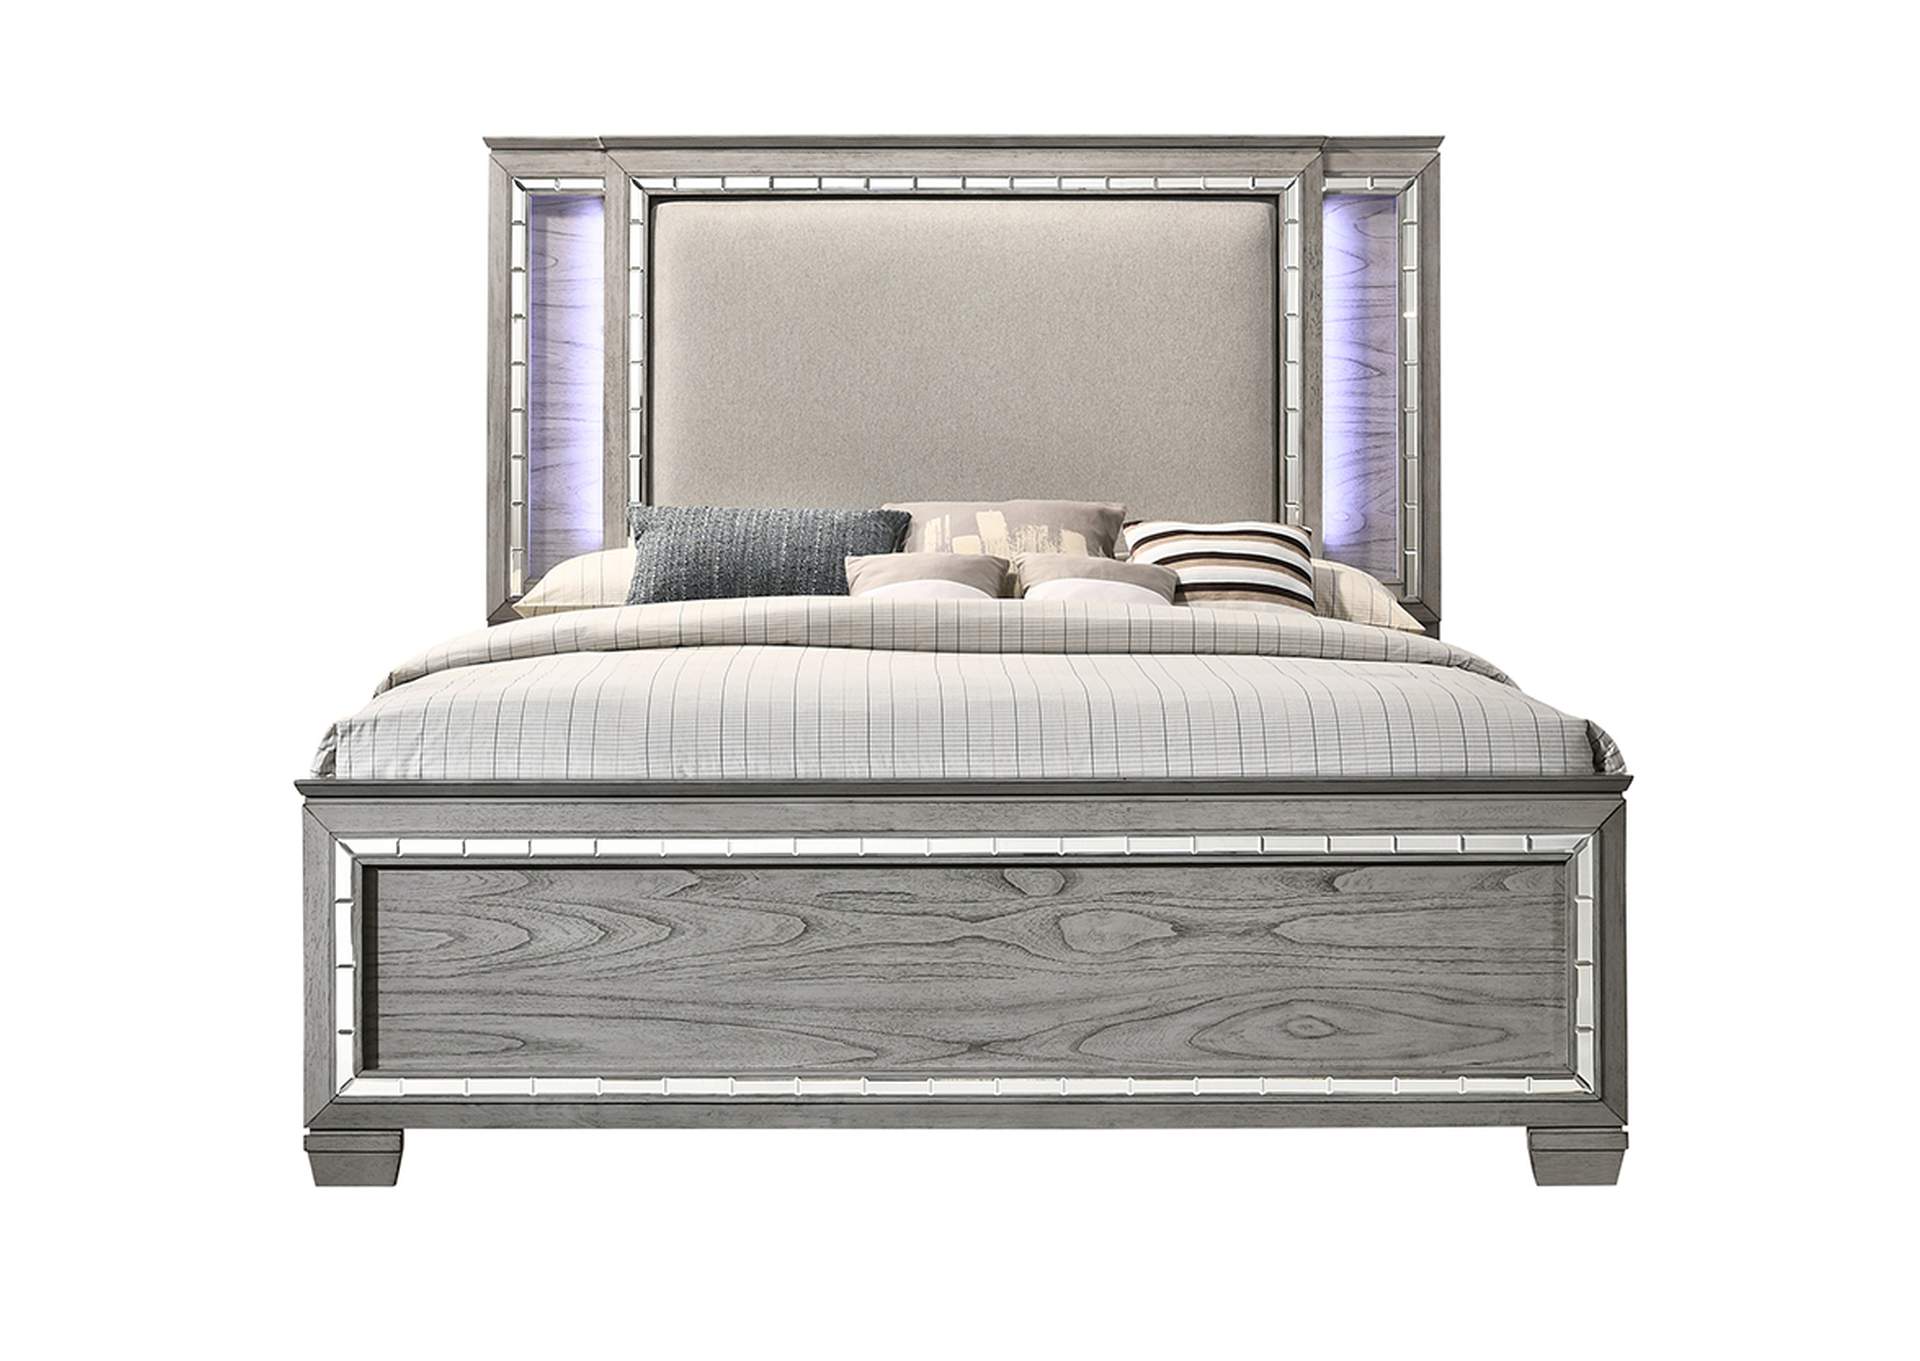 Antares Eastern King Bed,Acme